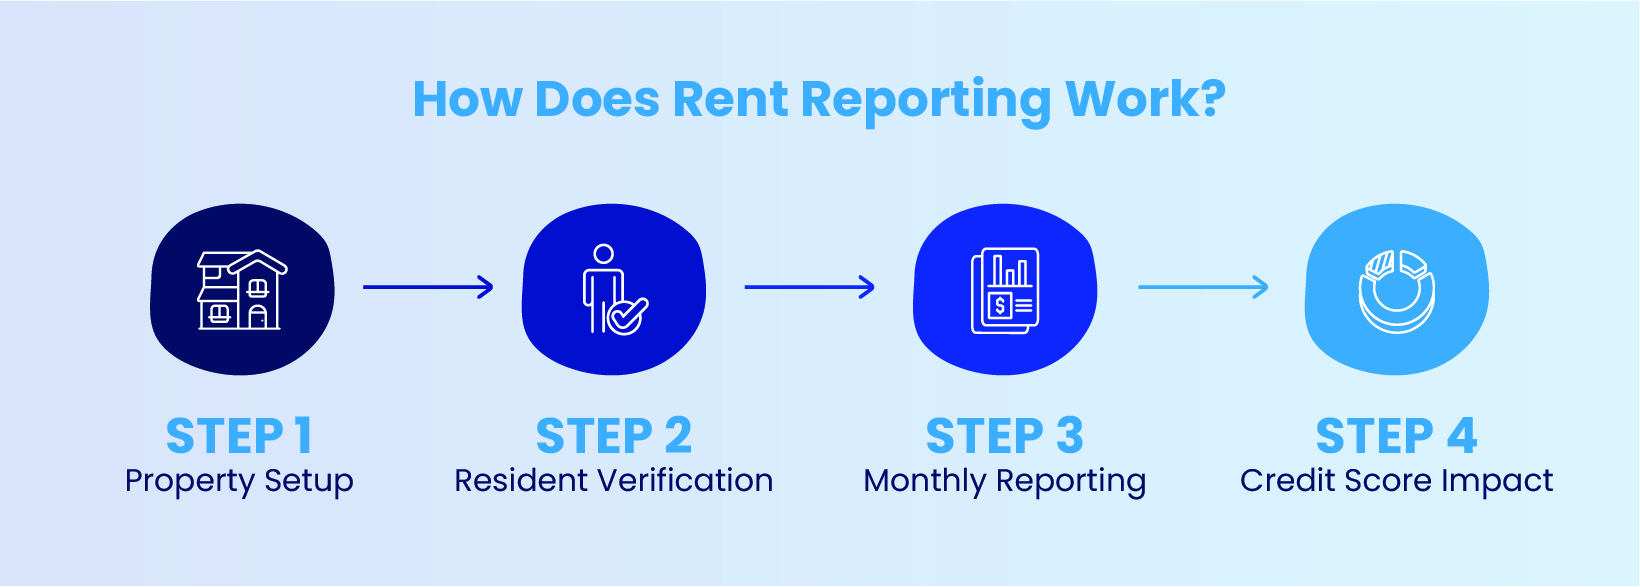 How does rent reporting work graphic